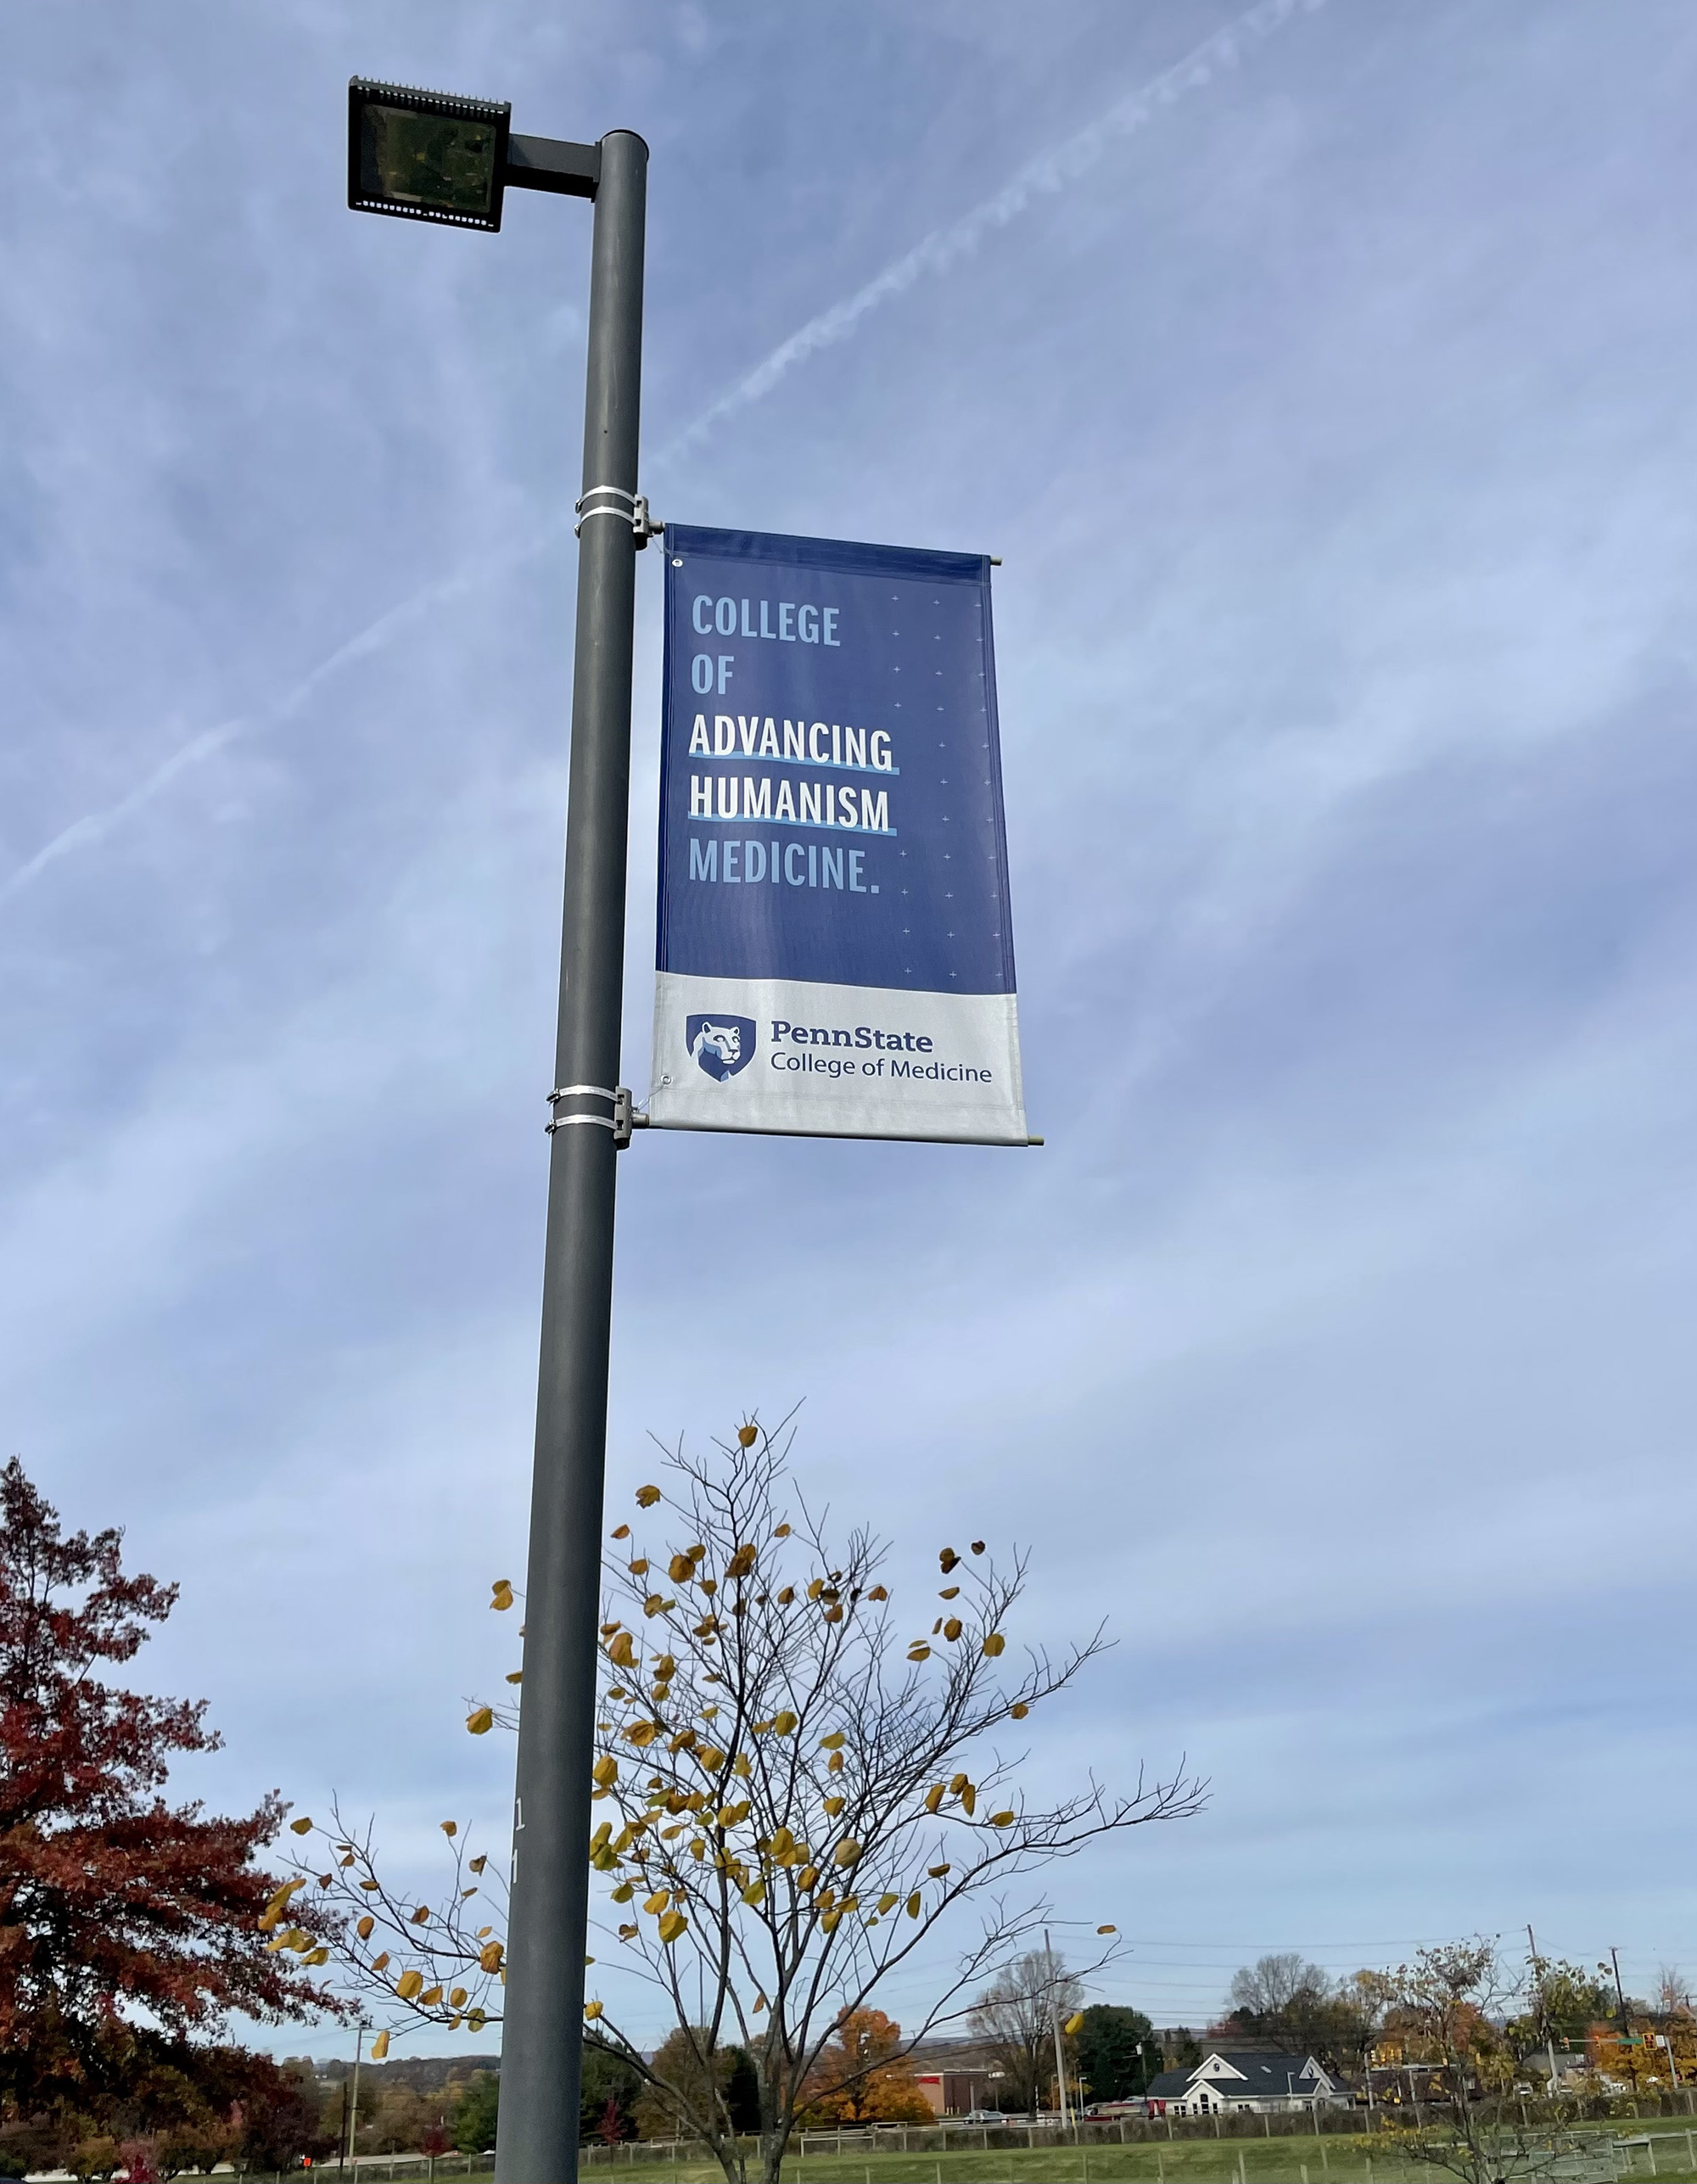 A banner on a light pole outdoors says College of Advancing Humanism Medicine